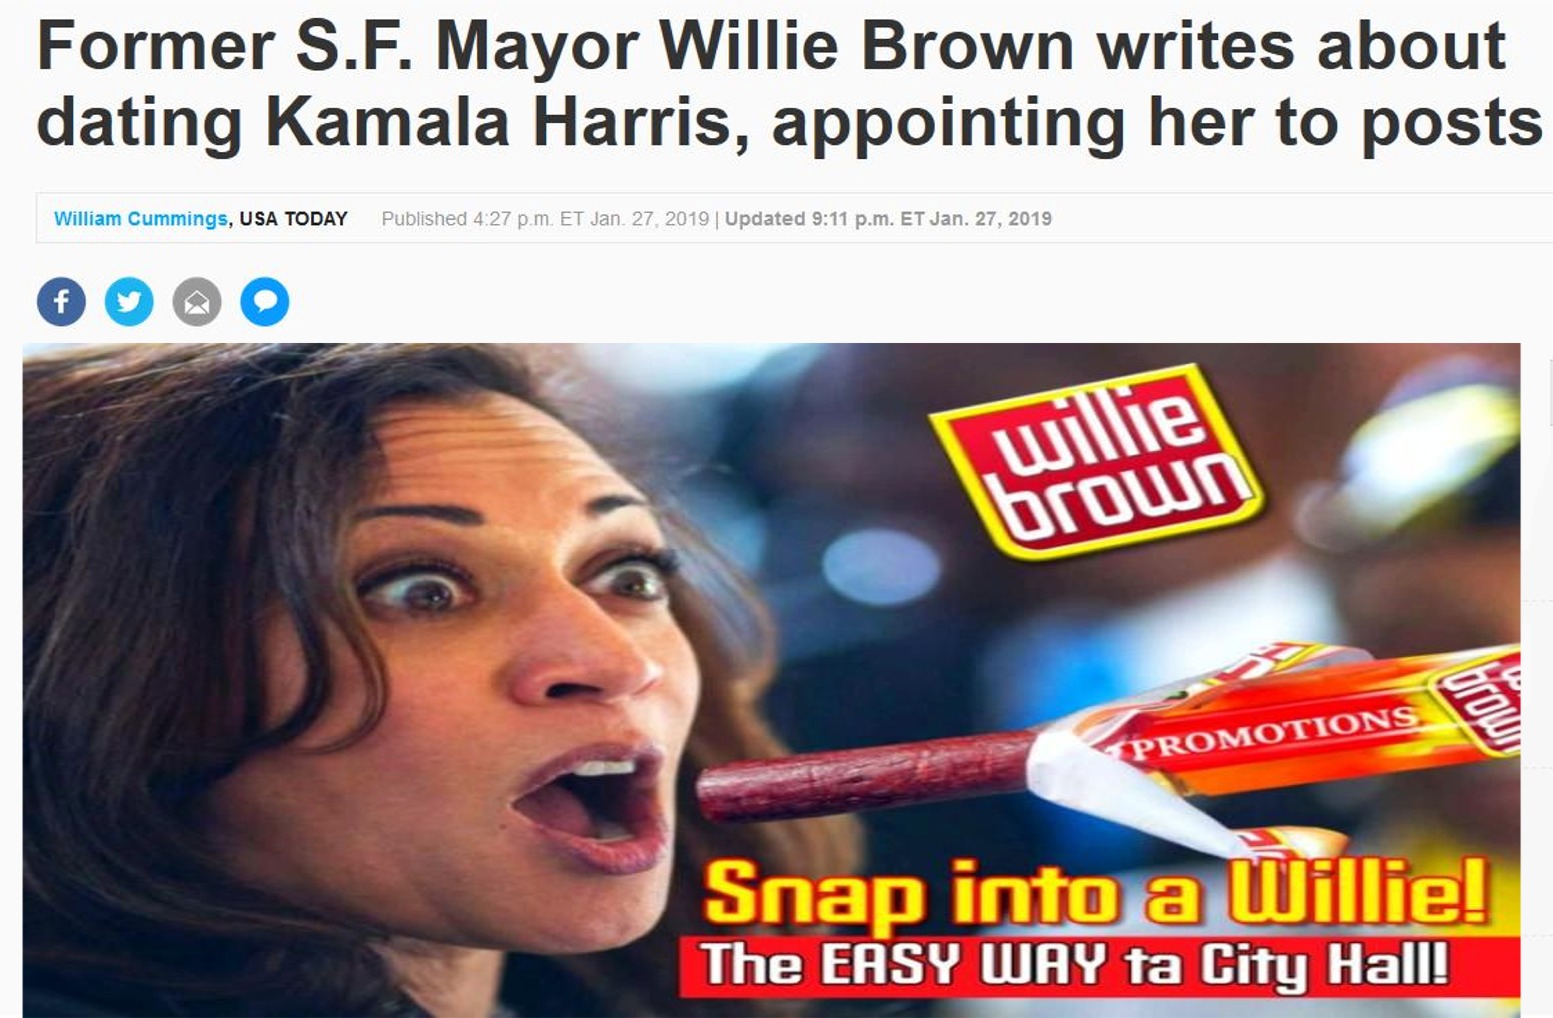 memes - photo caption - Former S.F. Mayor Willie Brown writes about dating Kamala Harris, appointing her to posts William Cummings, Usa Today Published Et Jan. 27. 2019 | Updated p.m. Et Jan. 27, 2019 Willie 60 Promotions Snap into a Willie! The Easy Way 